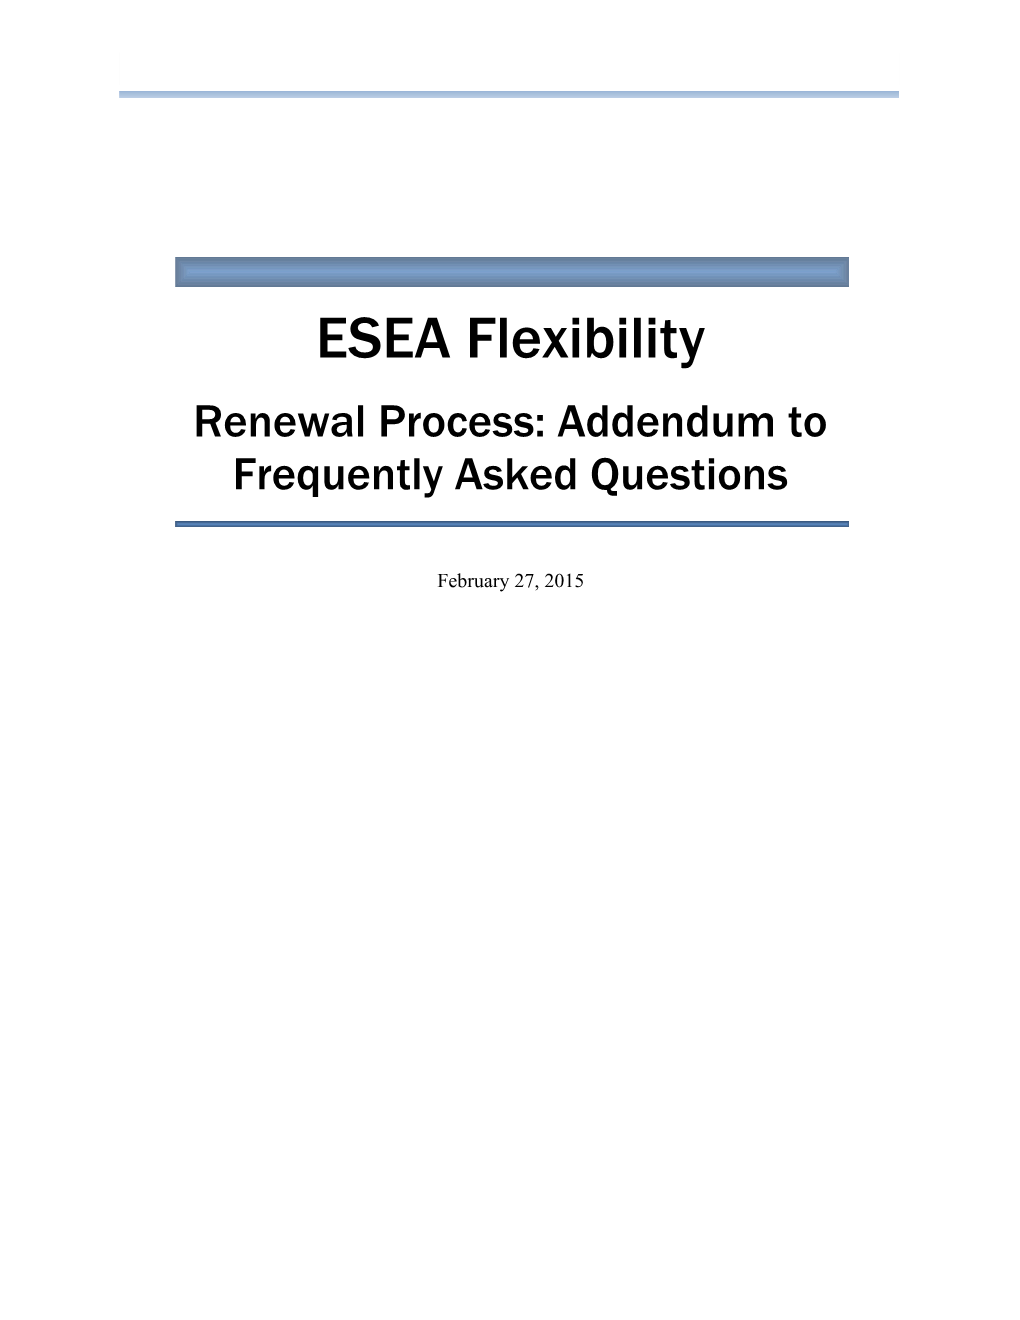 Frequently Asked Questions - ESEA Flexibility (MS Word)